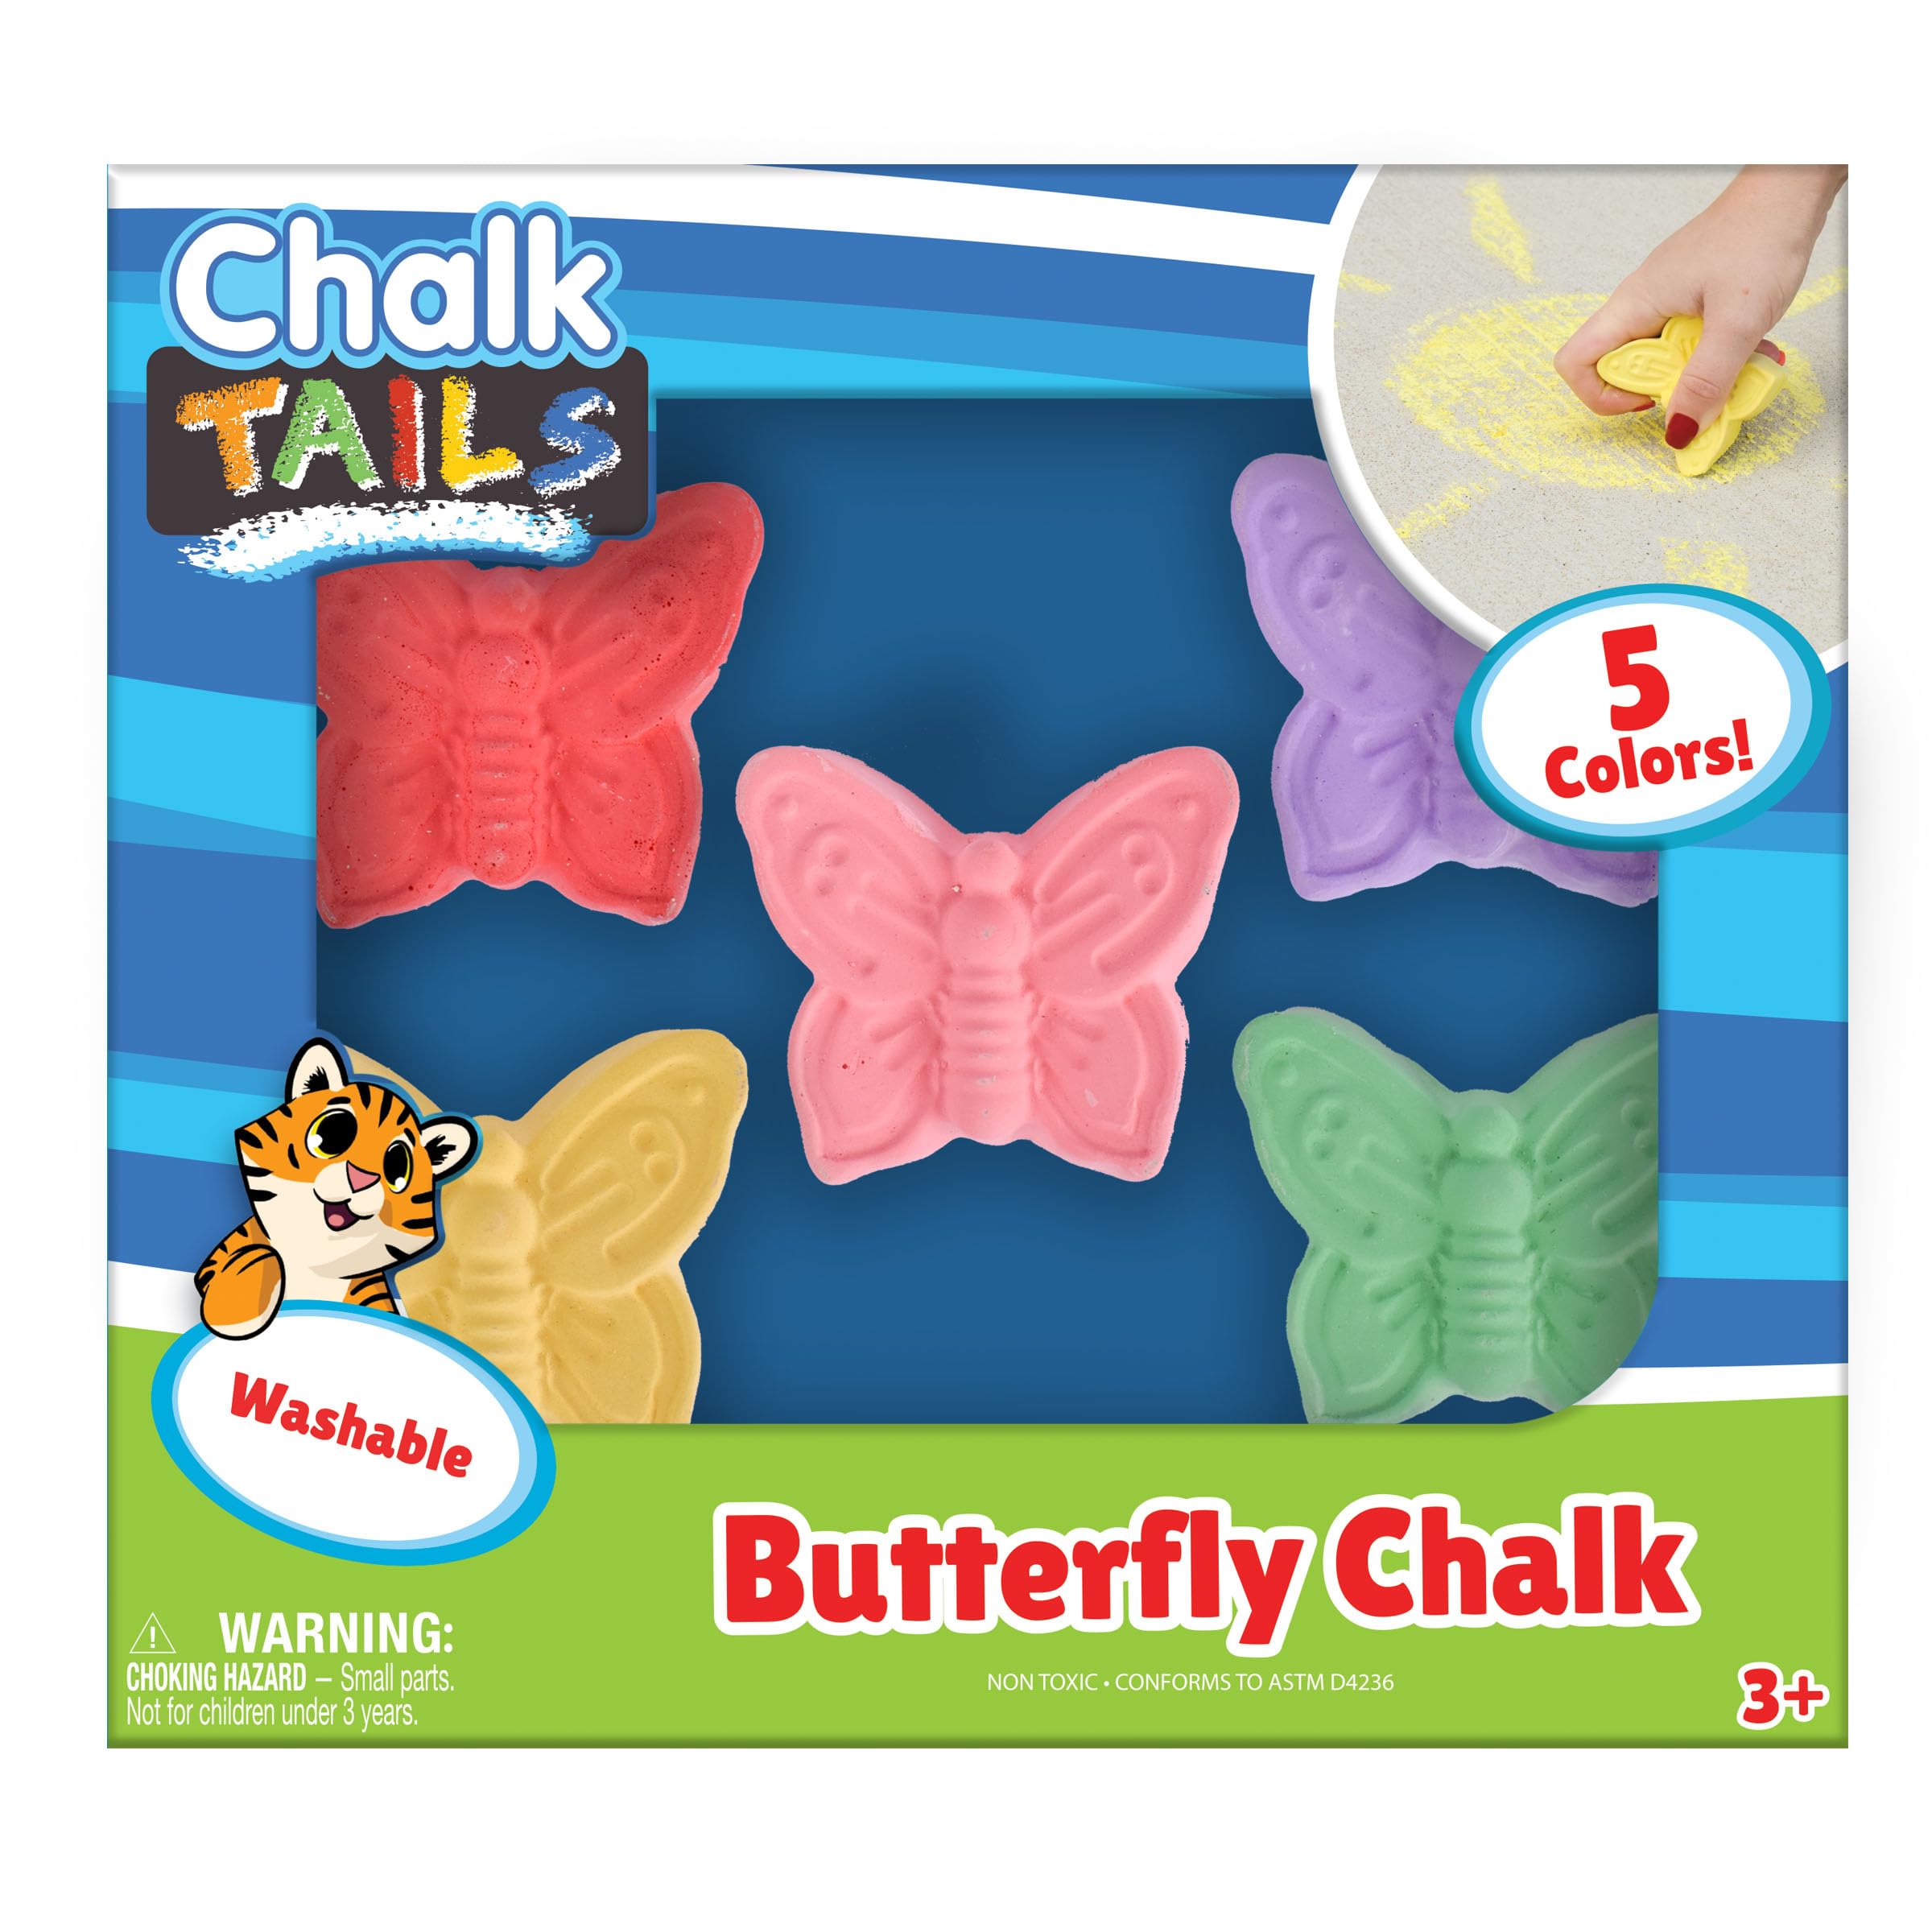 Butterfly Chalk – 5 Pieces of Colorful Sidewalk Chalk | Washable, Non-Toxic For Arts and Crafts | Kids Ages 3+ - Sunny Days Entertainment